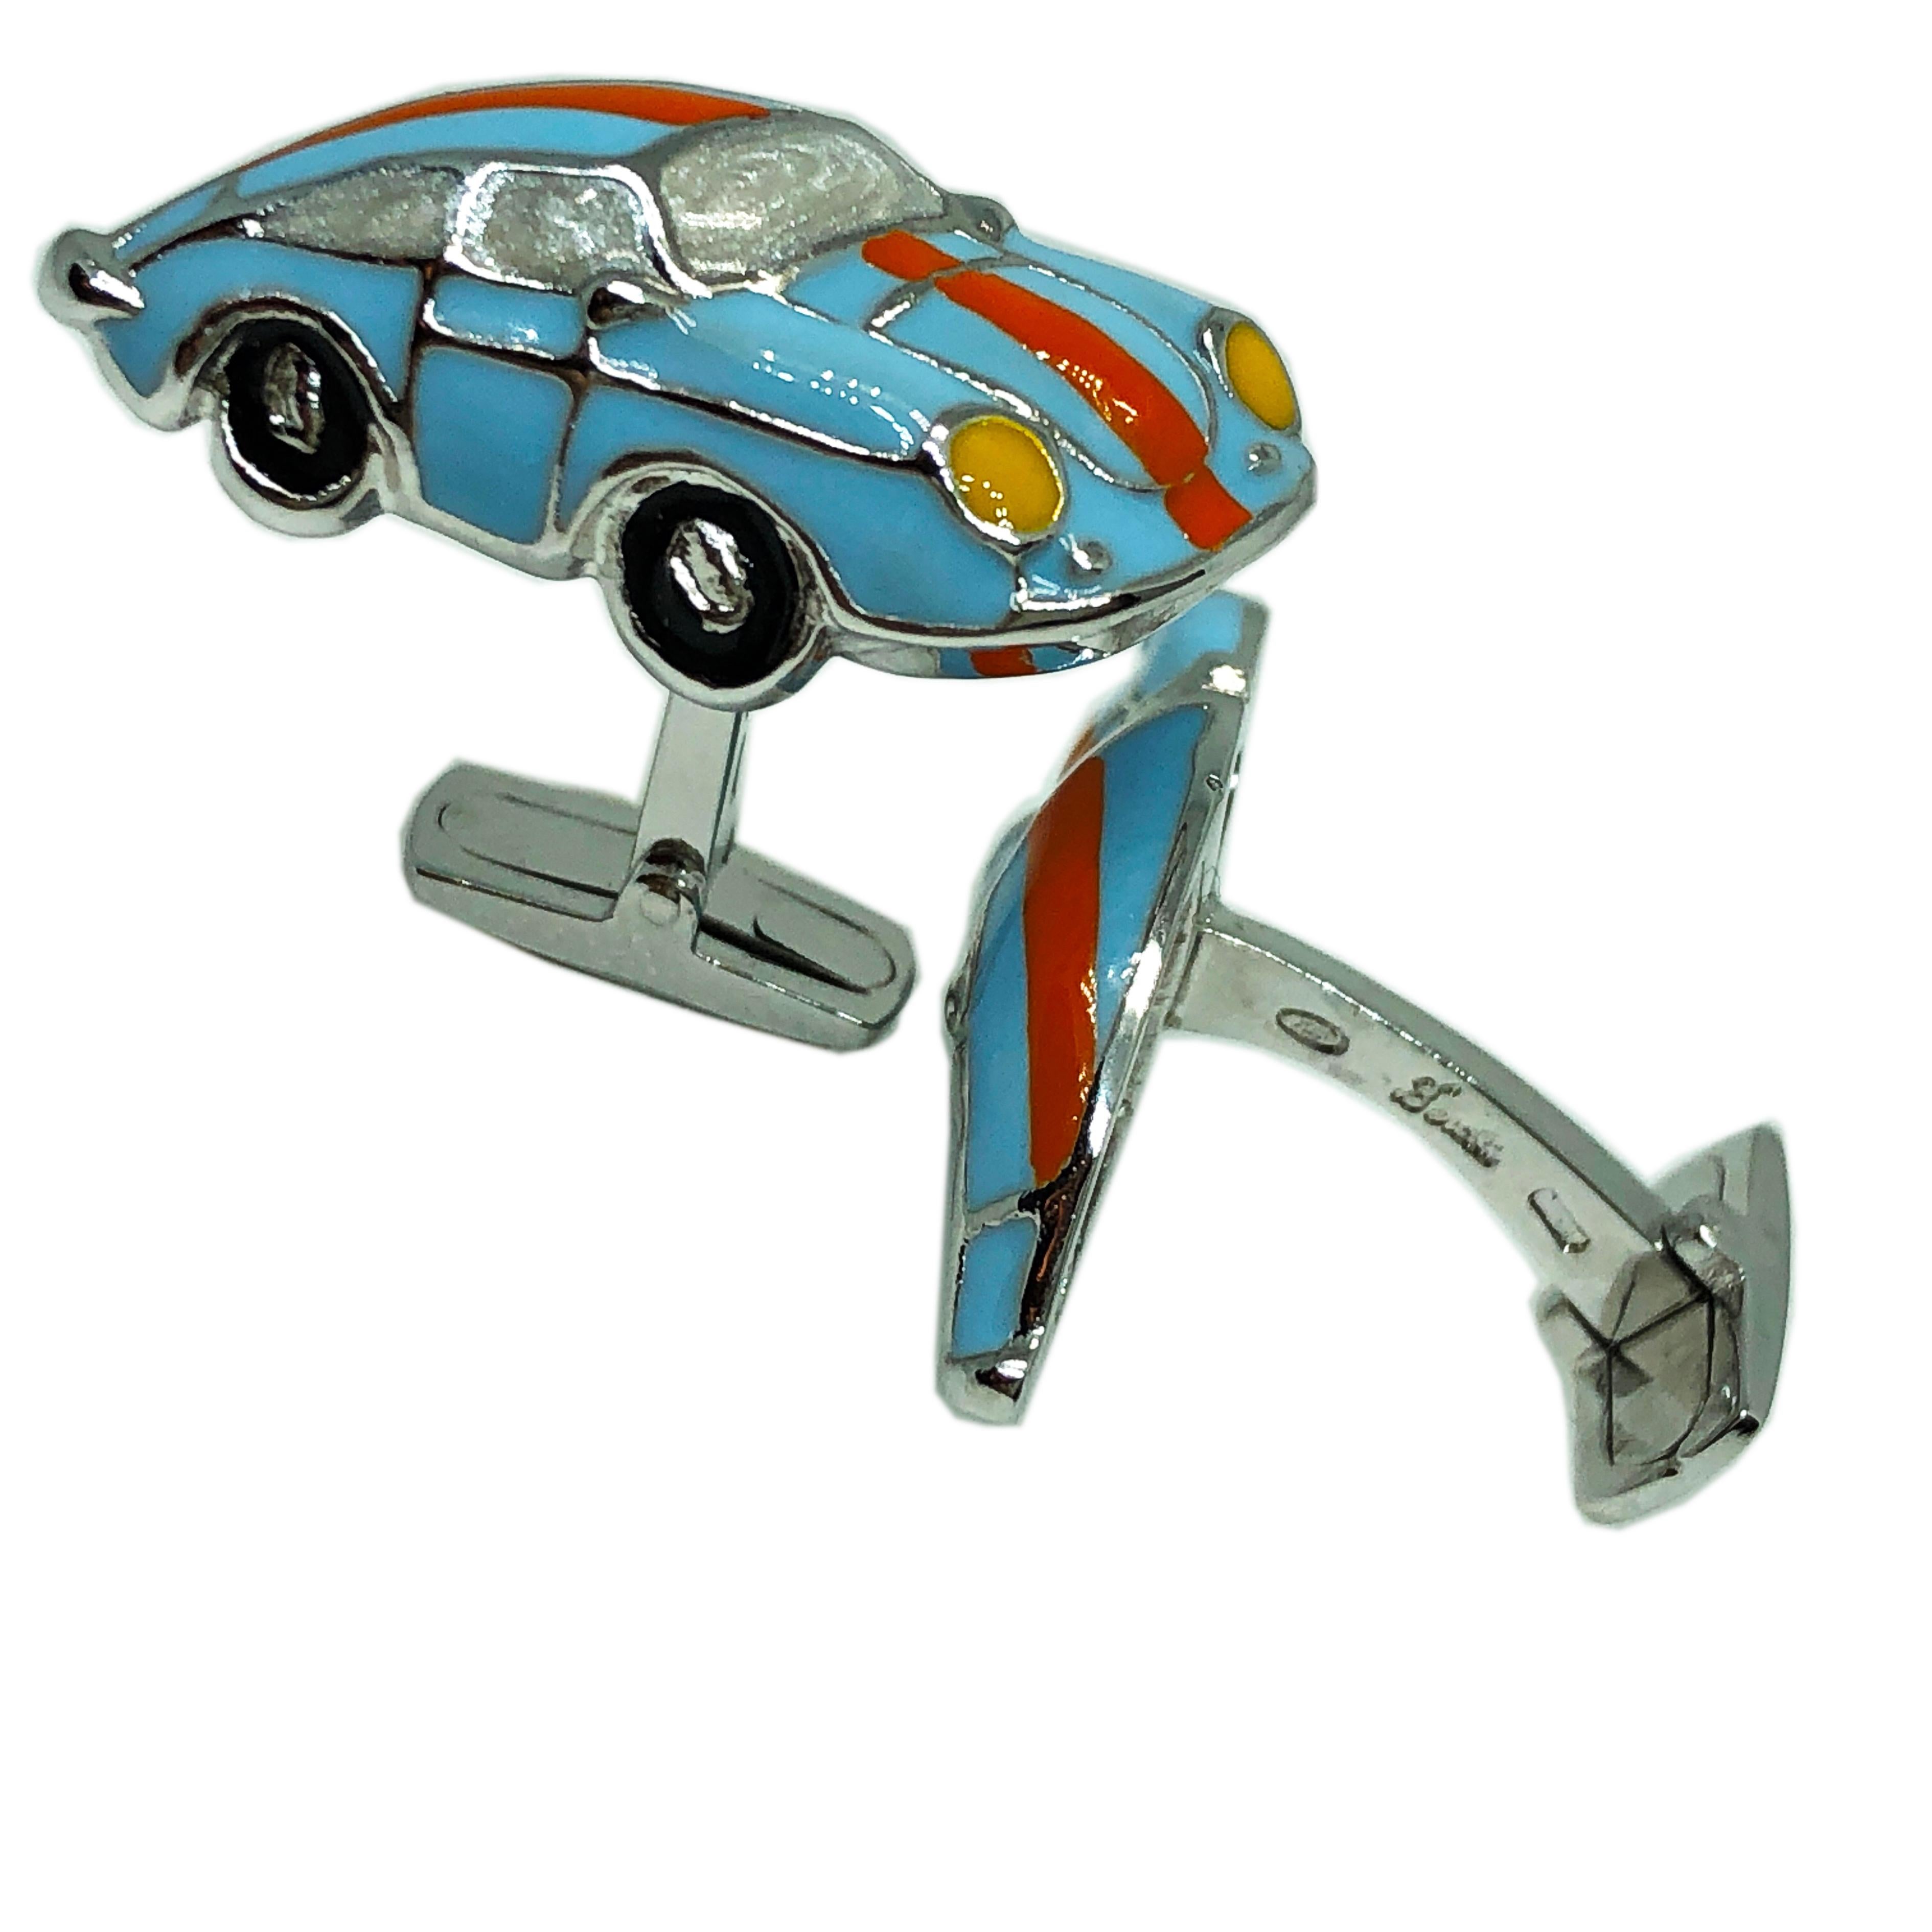 Berca Le Man Racing Color 911 Porsche Shaped Enameled Sterling Silver Cufflinks 2